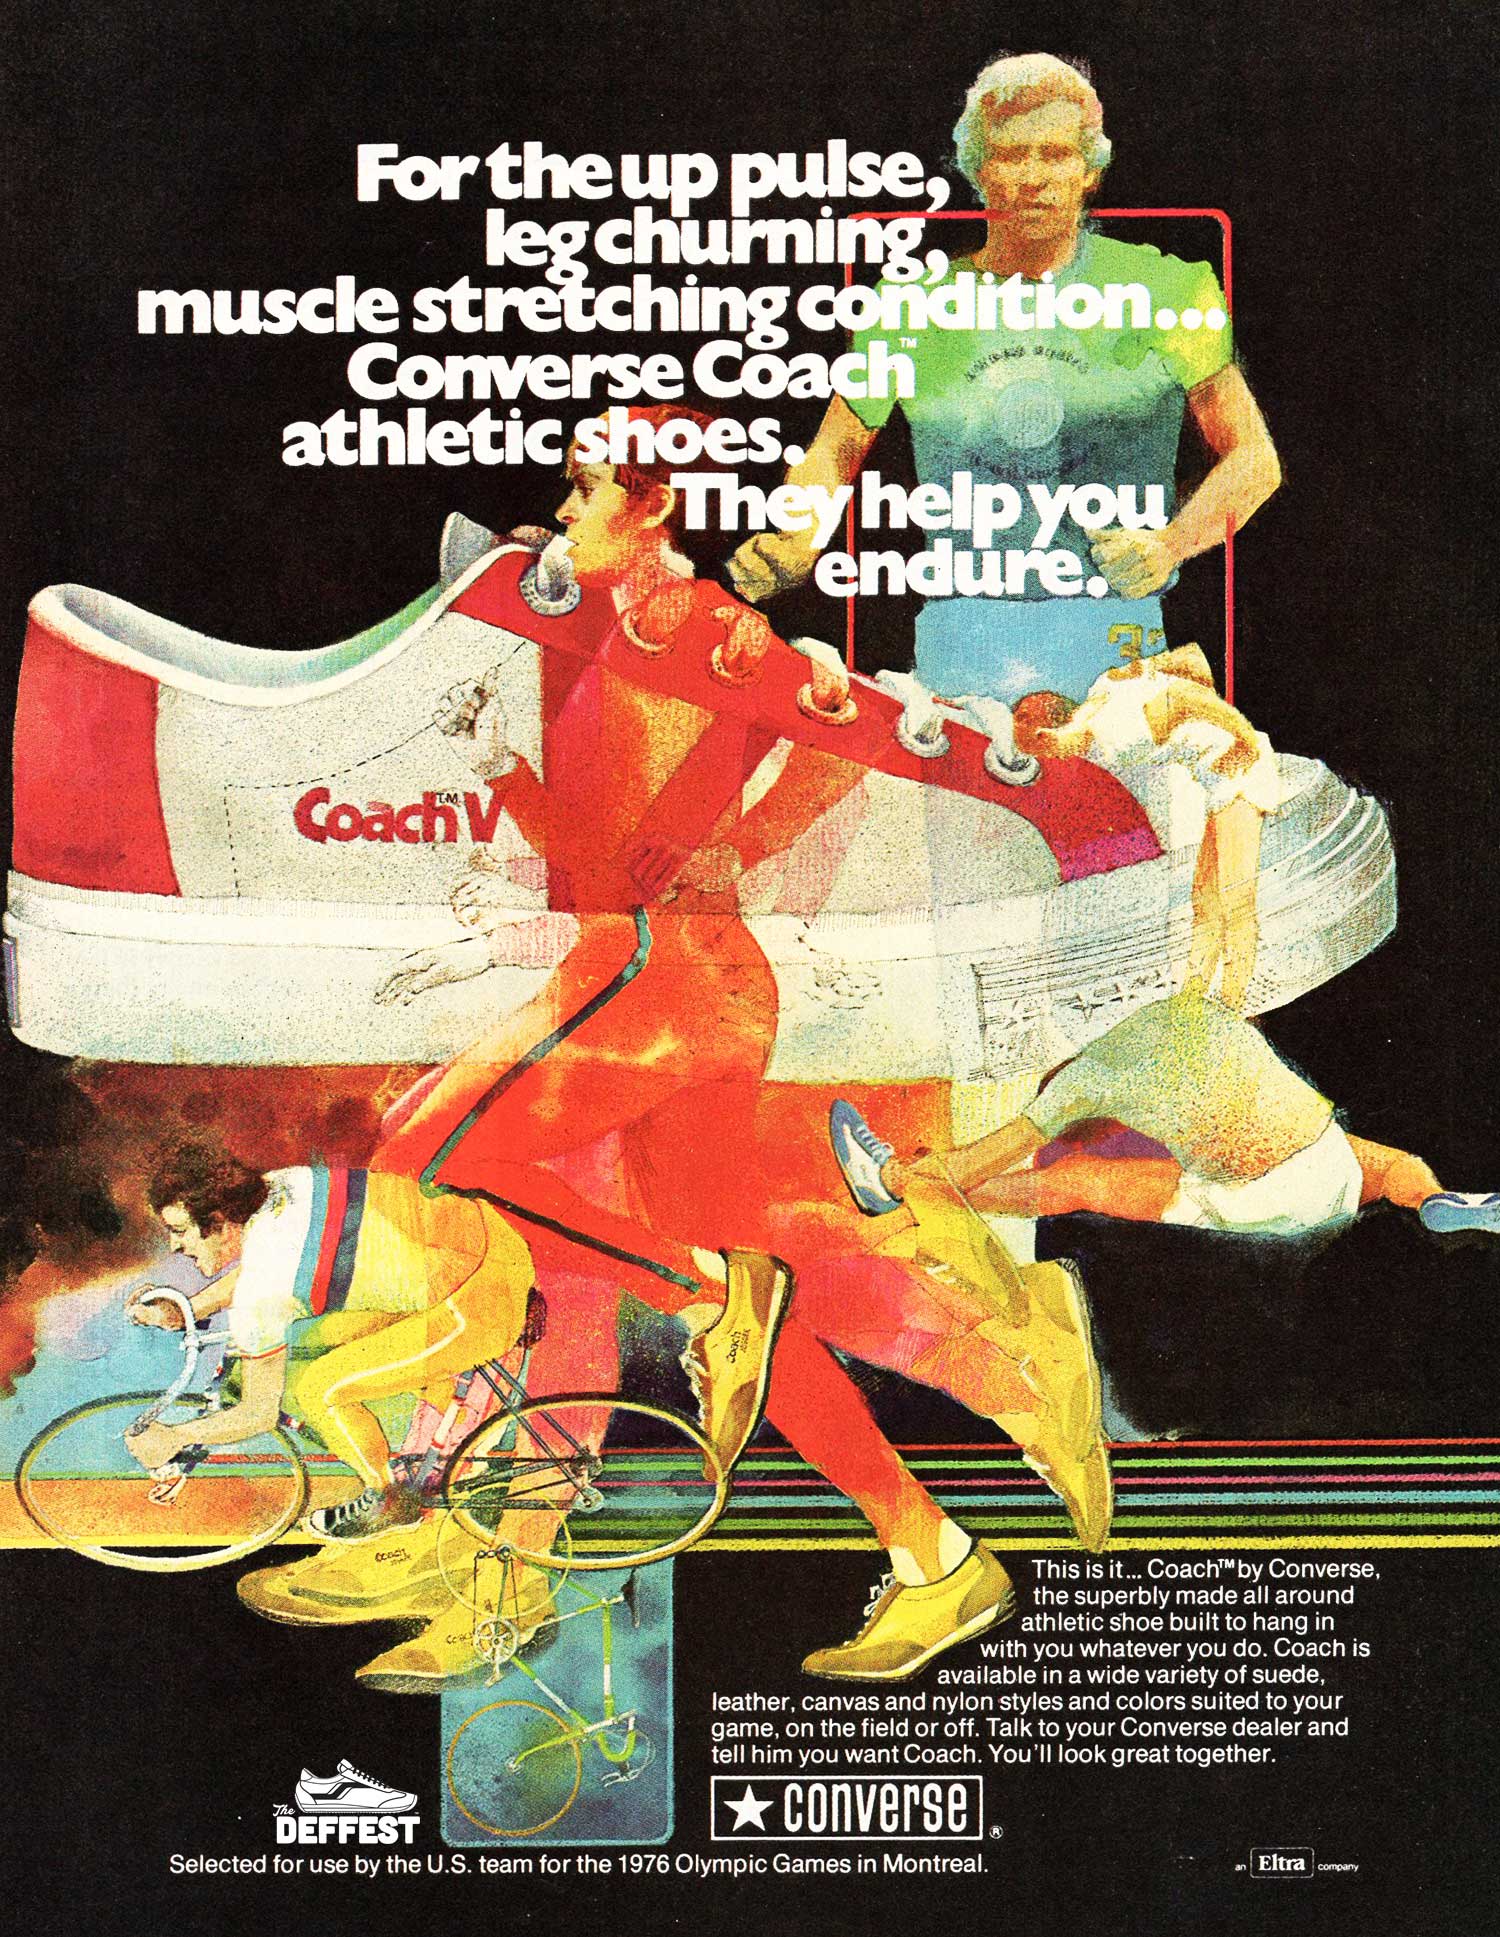 The Deffest®. vintage and retro sneaker blog. — Converse 1976 vintage sneaker ad